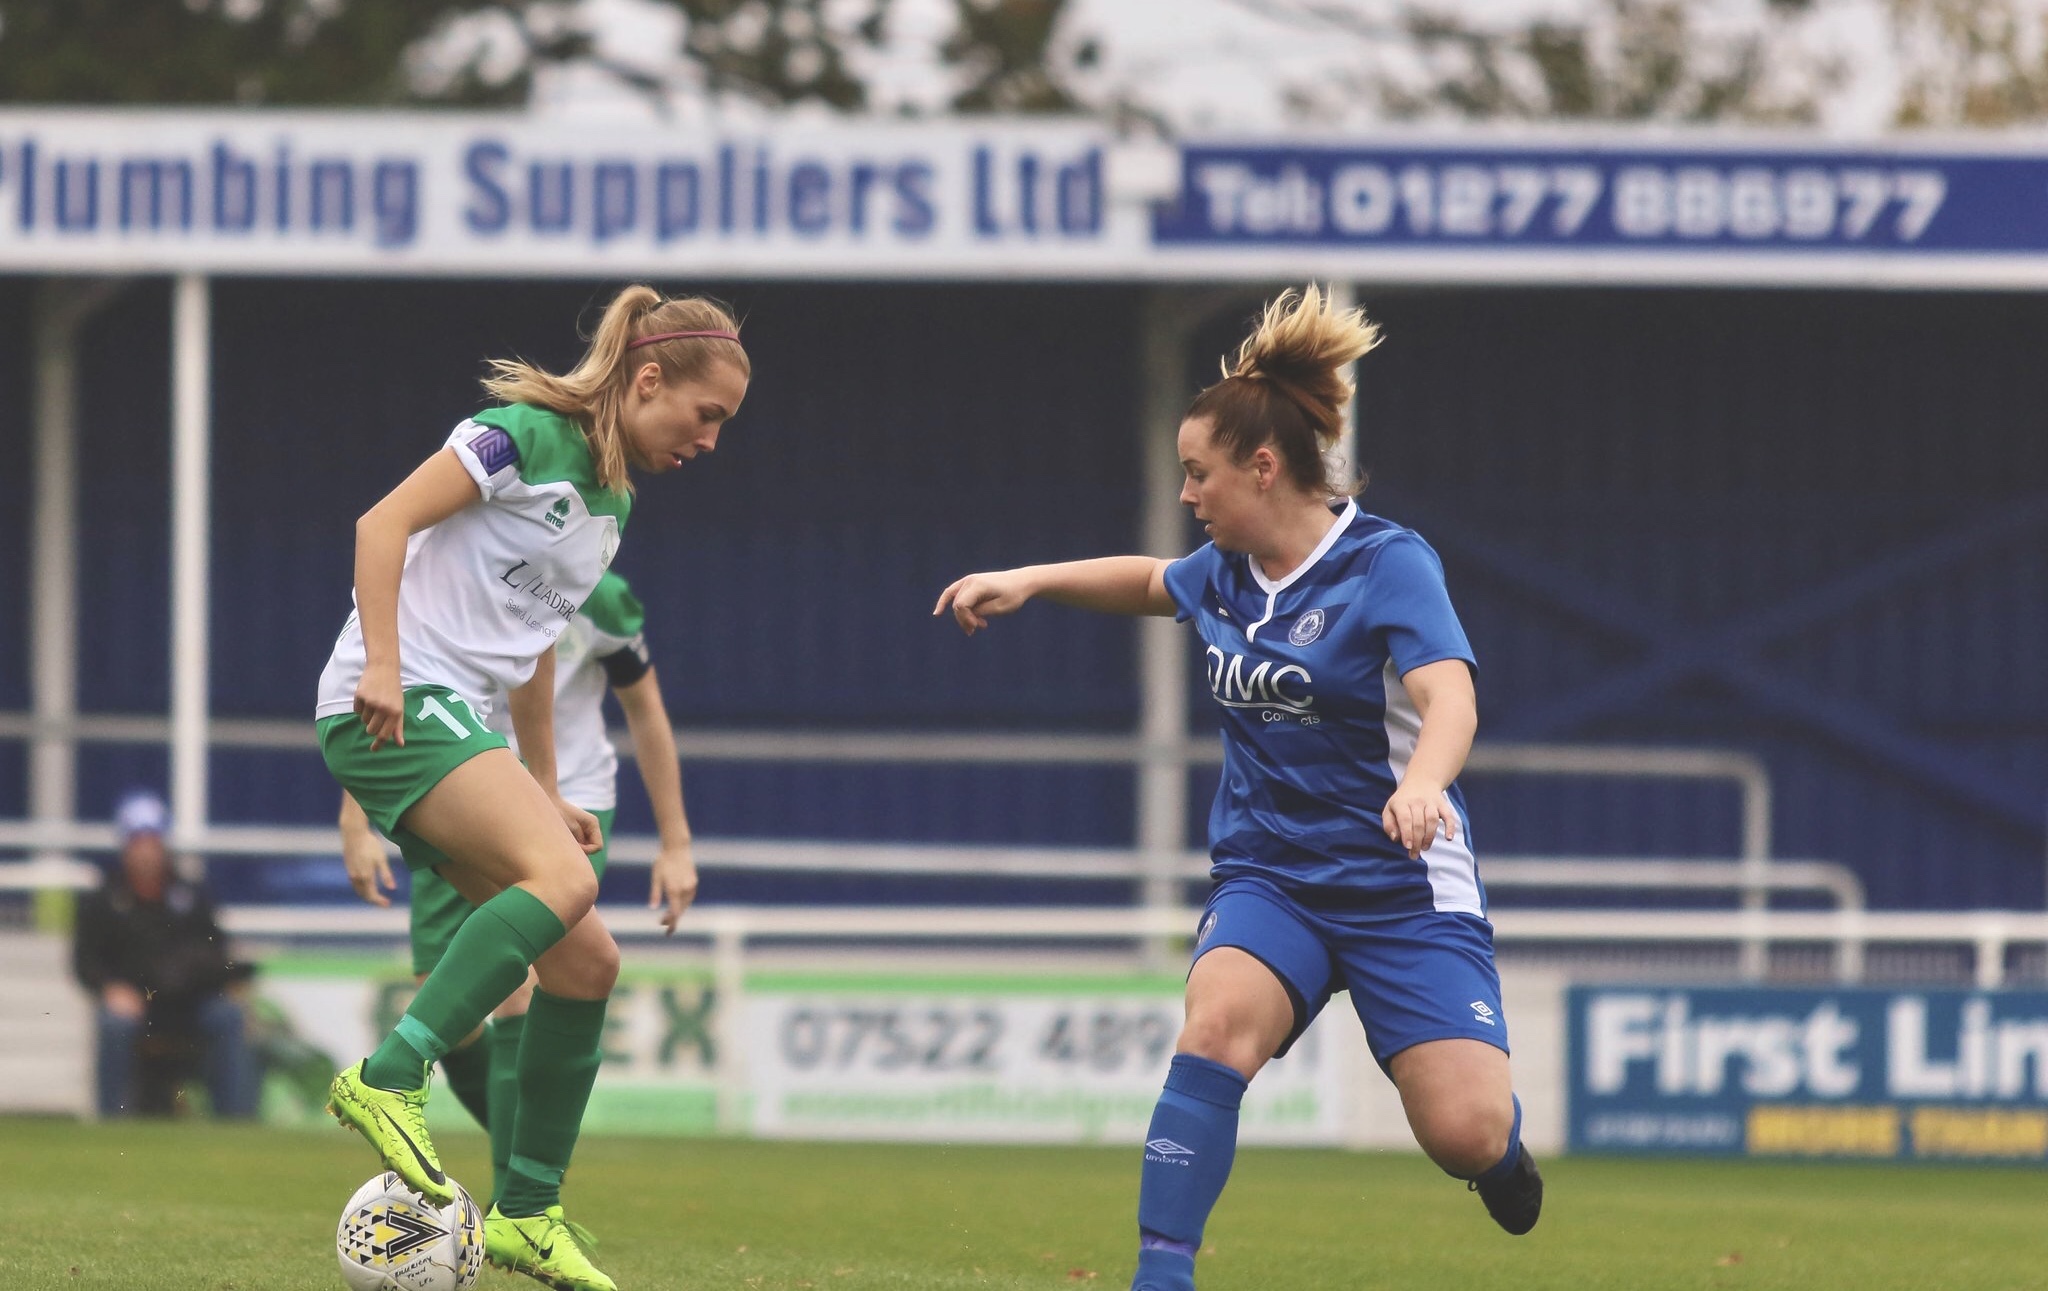 Tash Stephens at Billericay Ladies 0-2 Chichester City Ladies. Photo by Sheena Booker